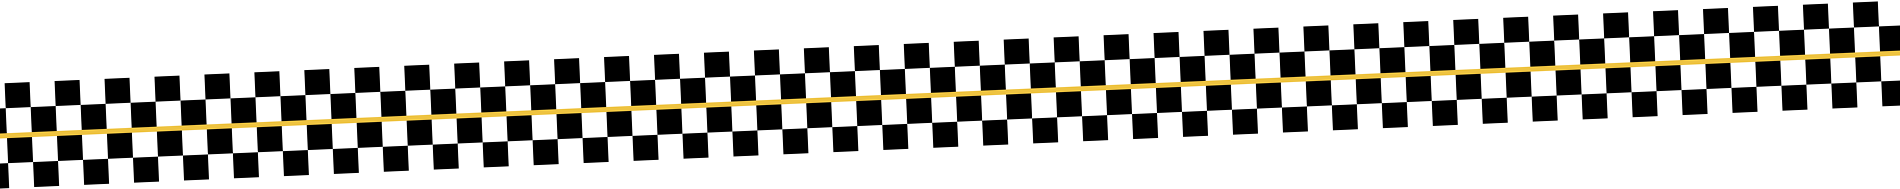 Finish Line Clipart PNG Image